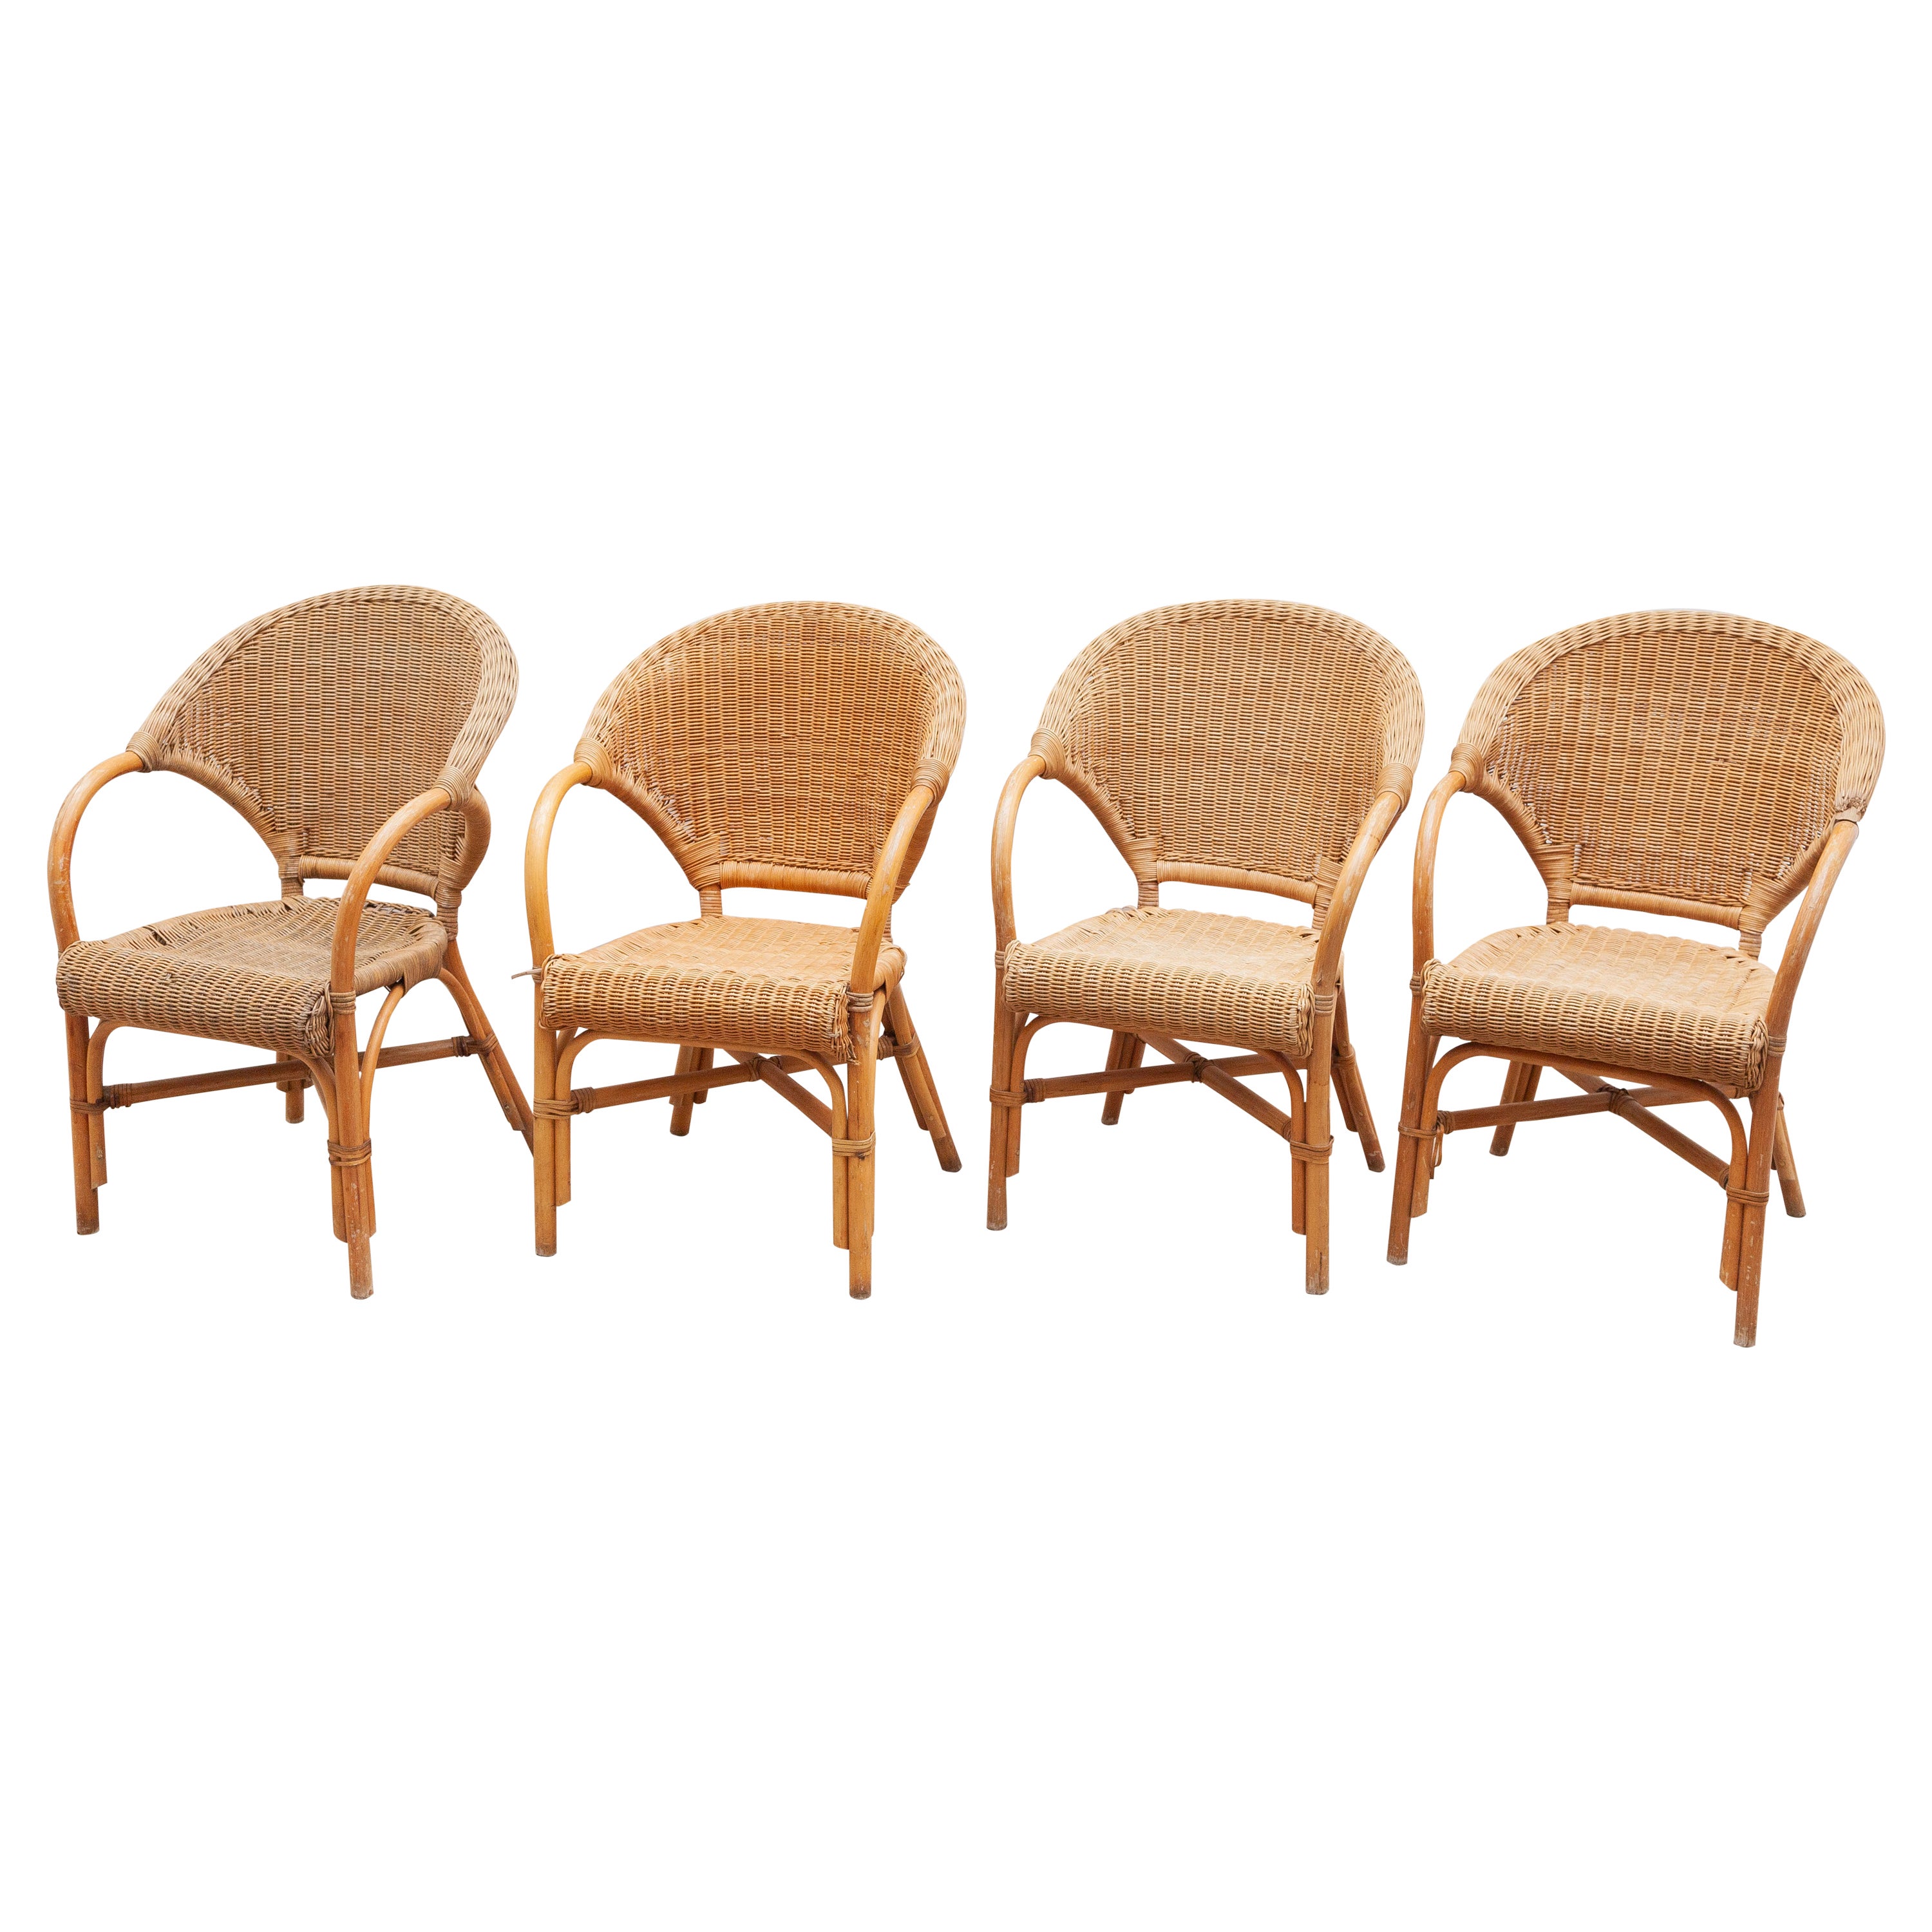 Set of Four Bamboo Arm Chairs